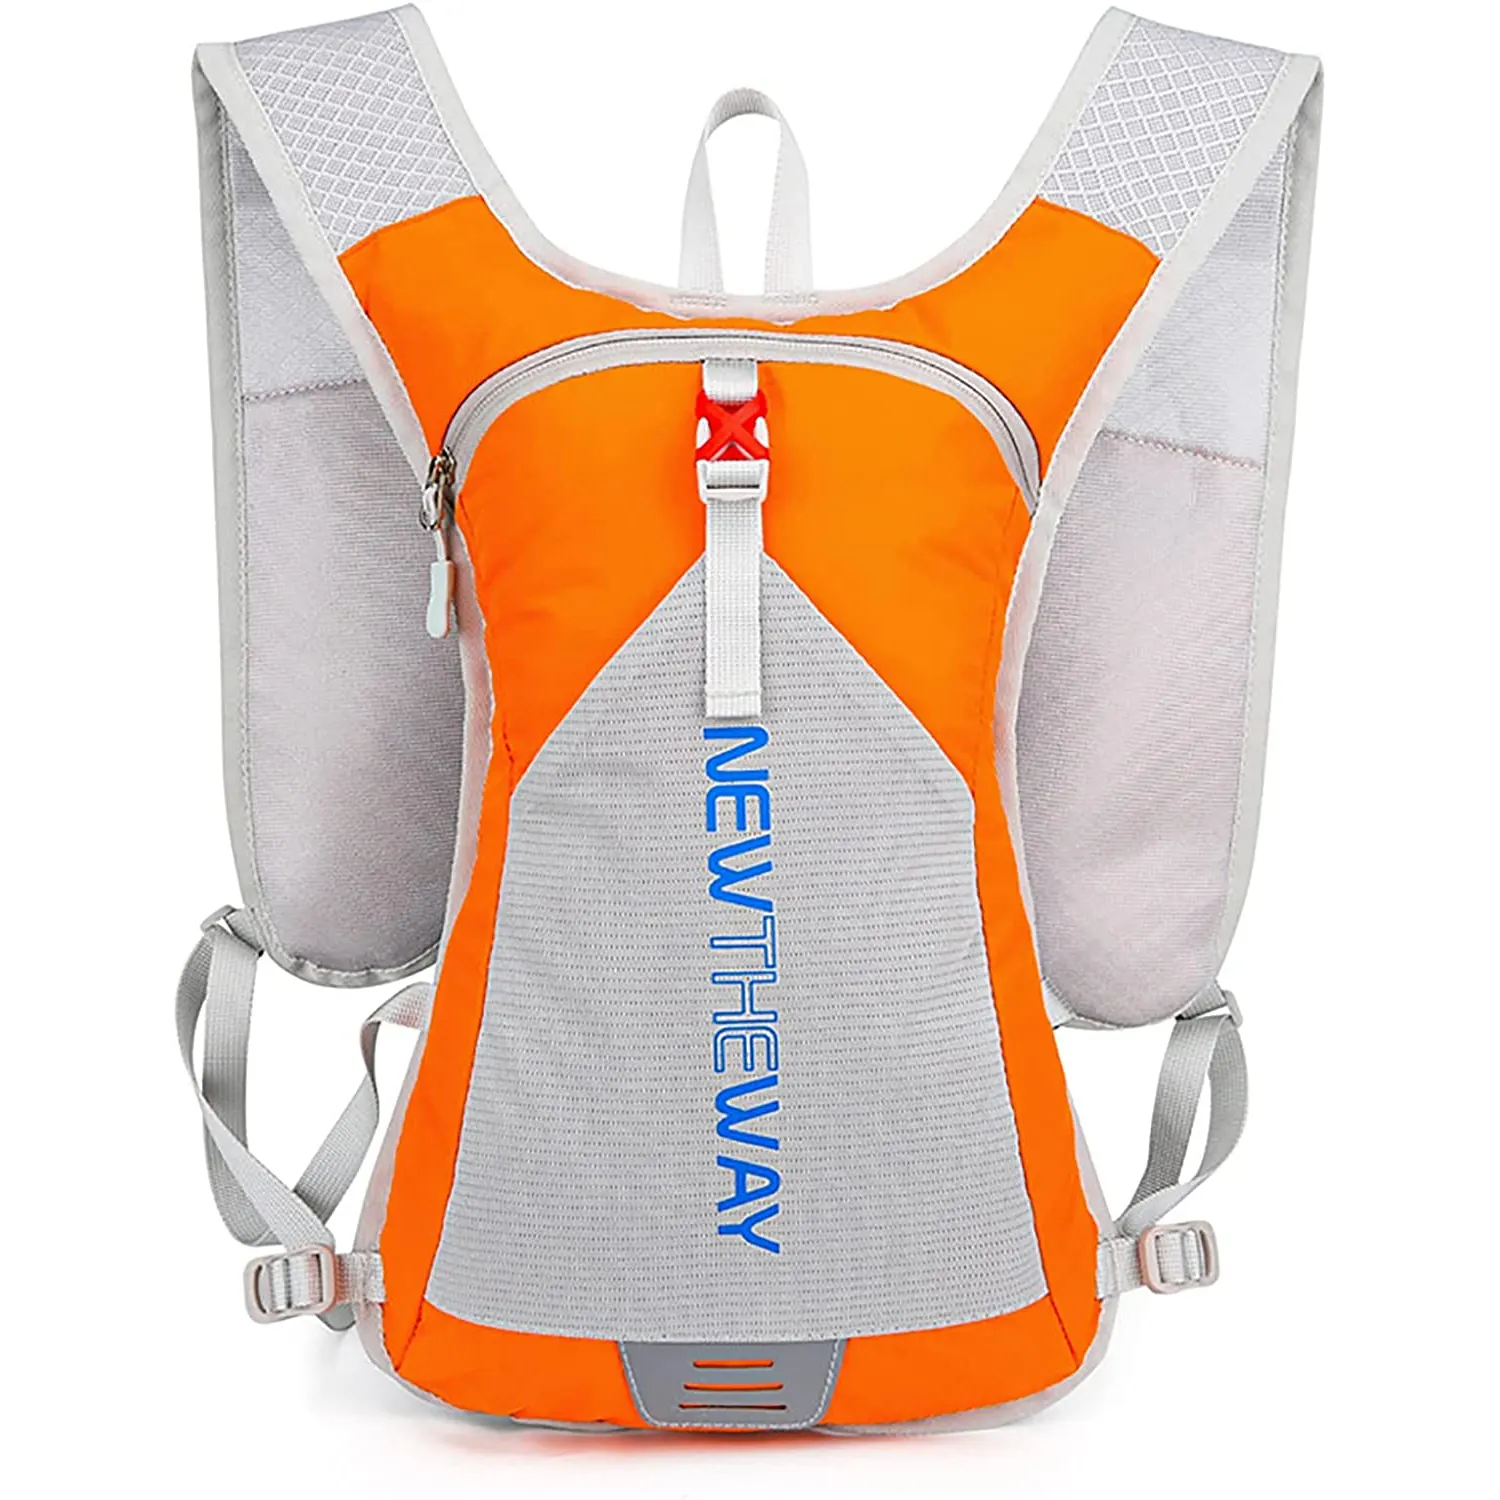 2L Outdoor Cycling Water Bag Backpack Suitable for Hiking Camping Running Hydration Vest